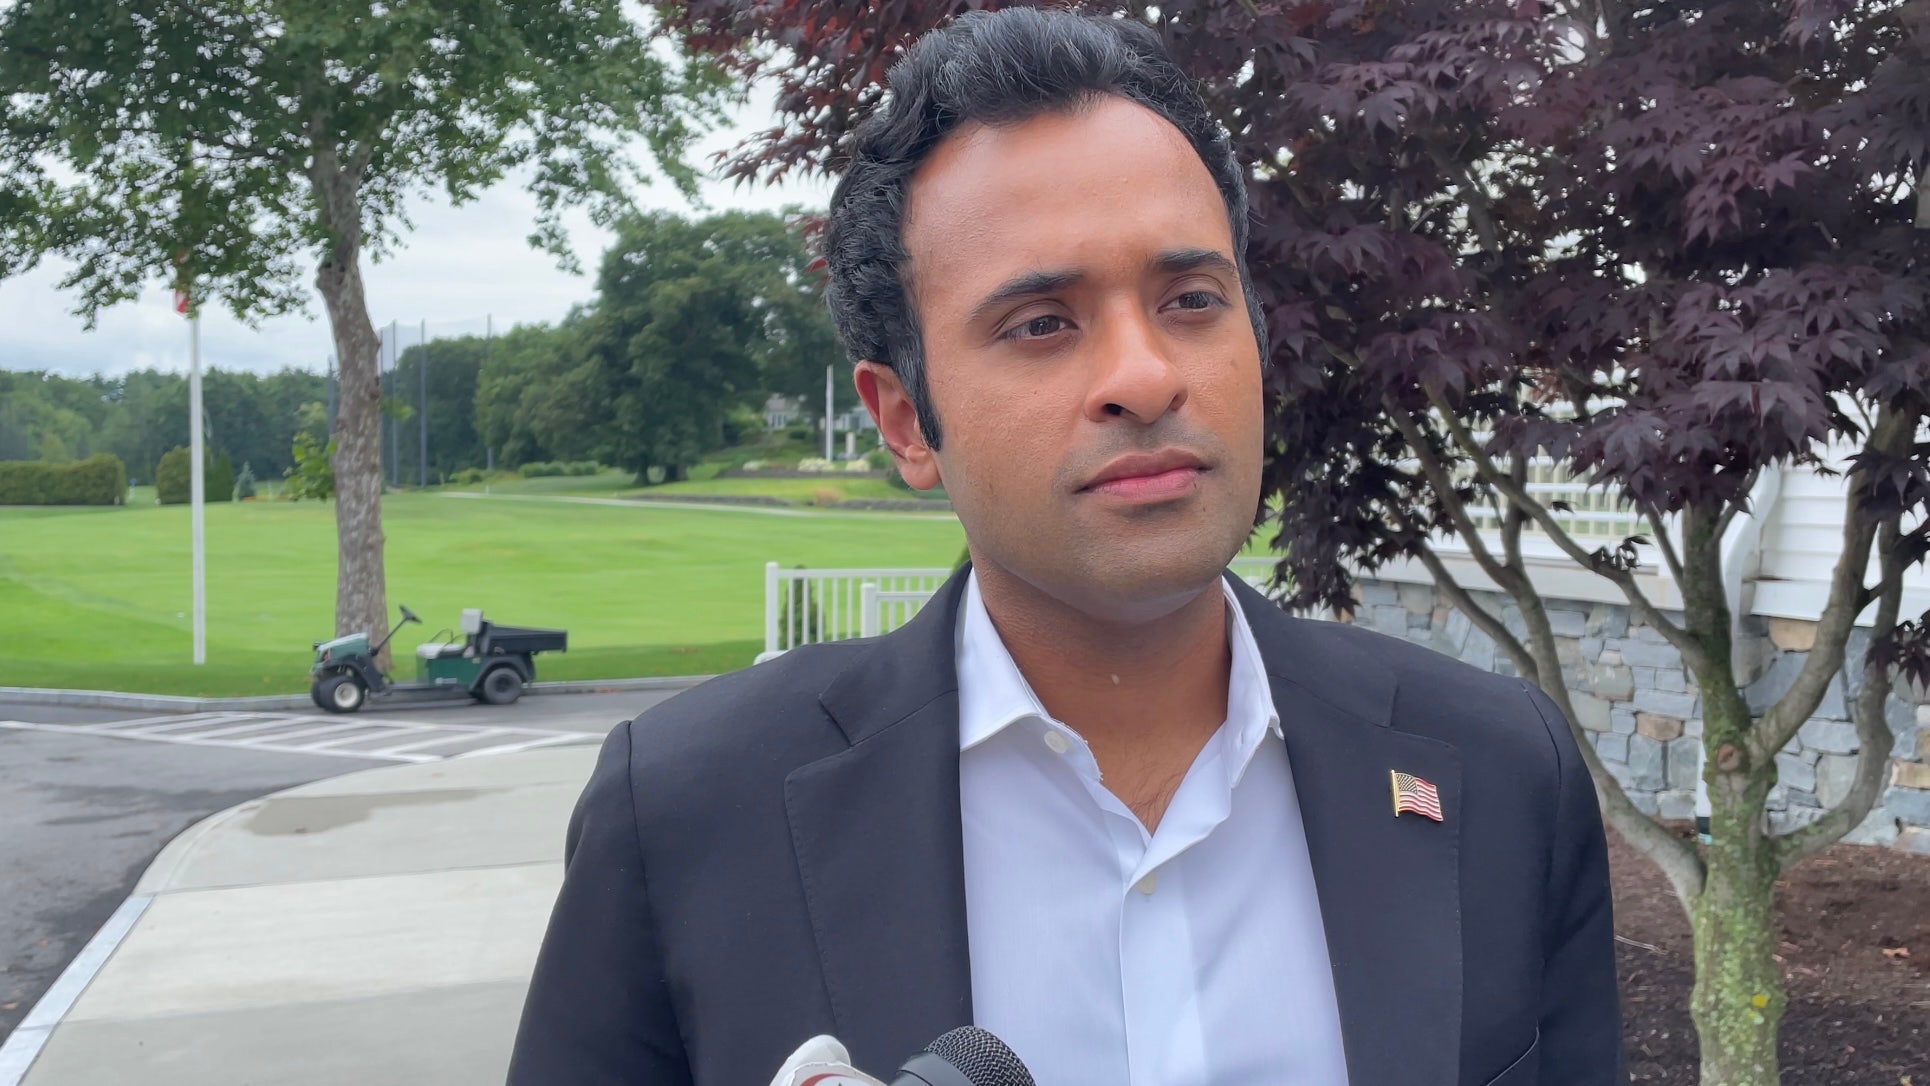 Firsttime GOP candidate Vivek Ramaswamy says he's not getting 'overly